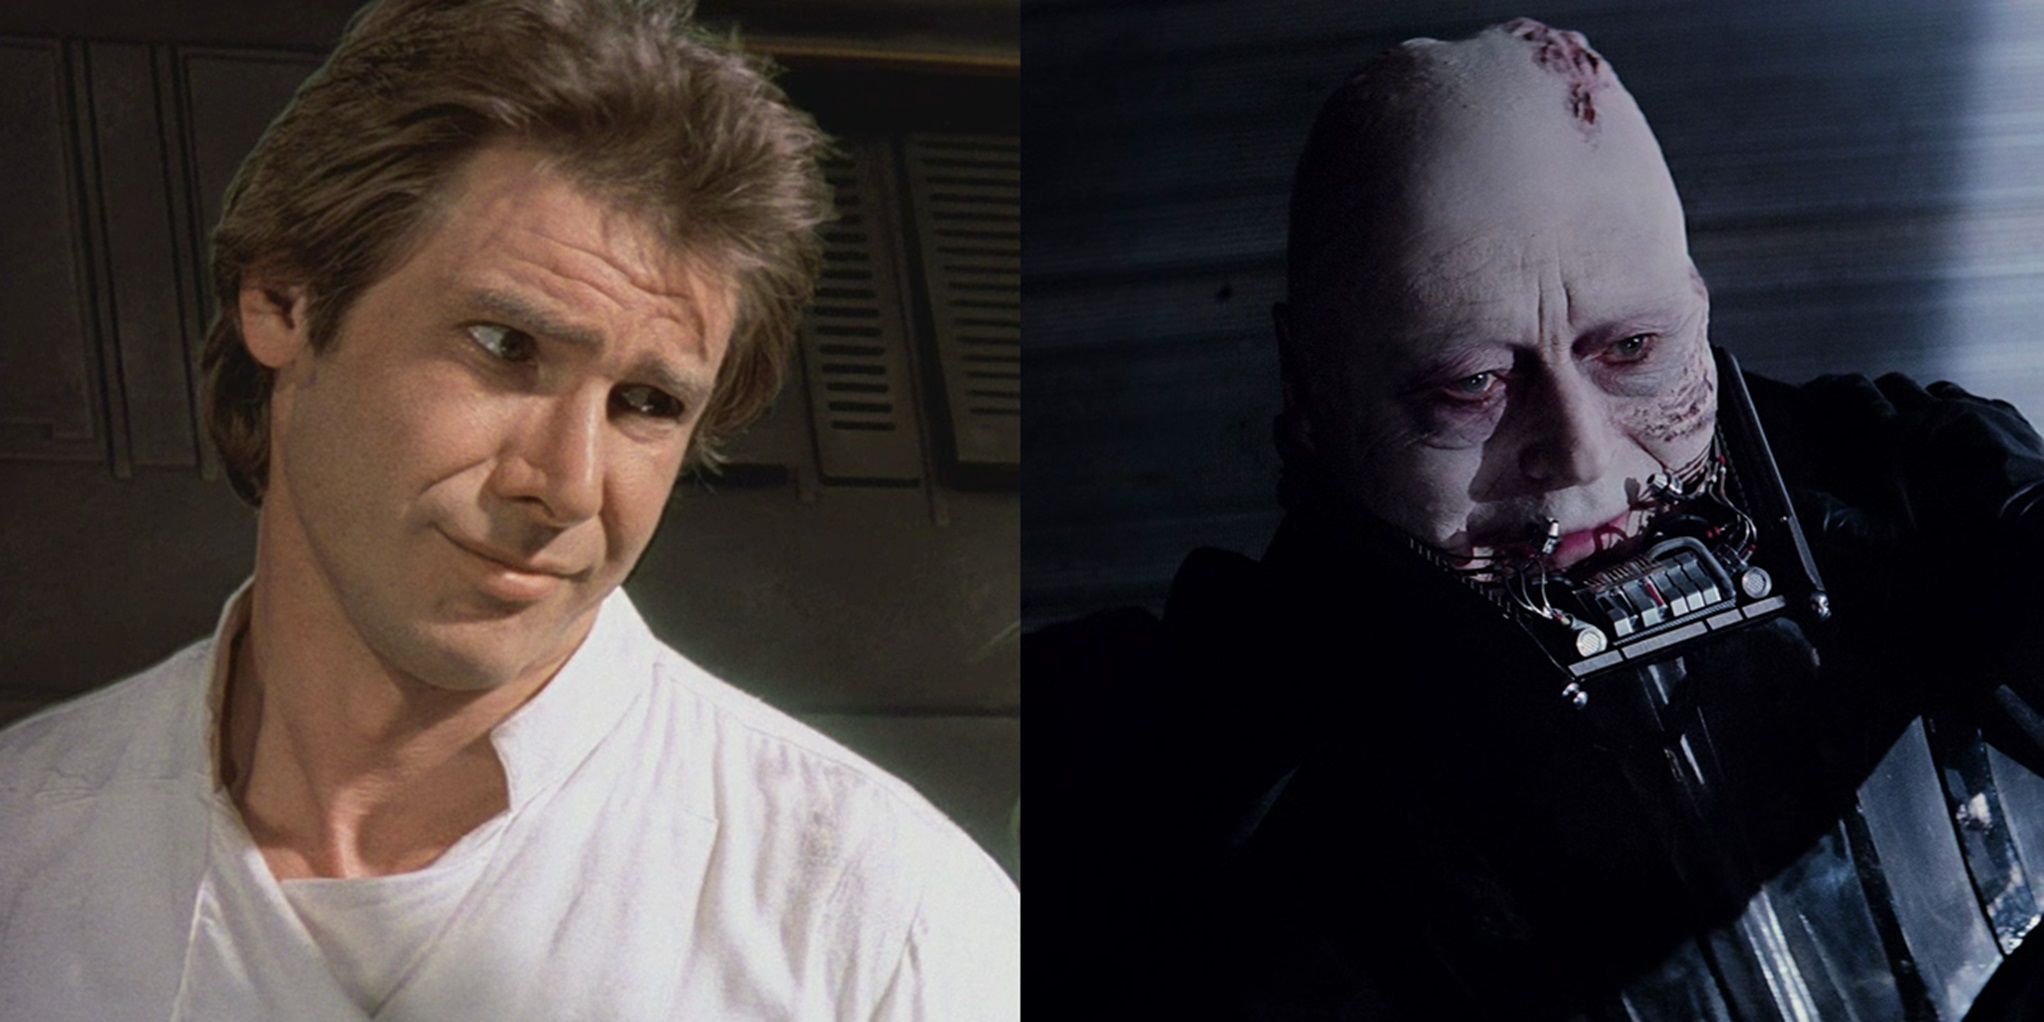 Han Solo smiling and Darth Vader unmasked in Return of the Jedi